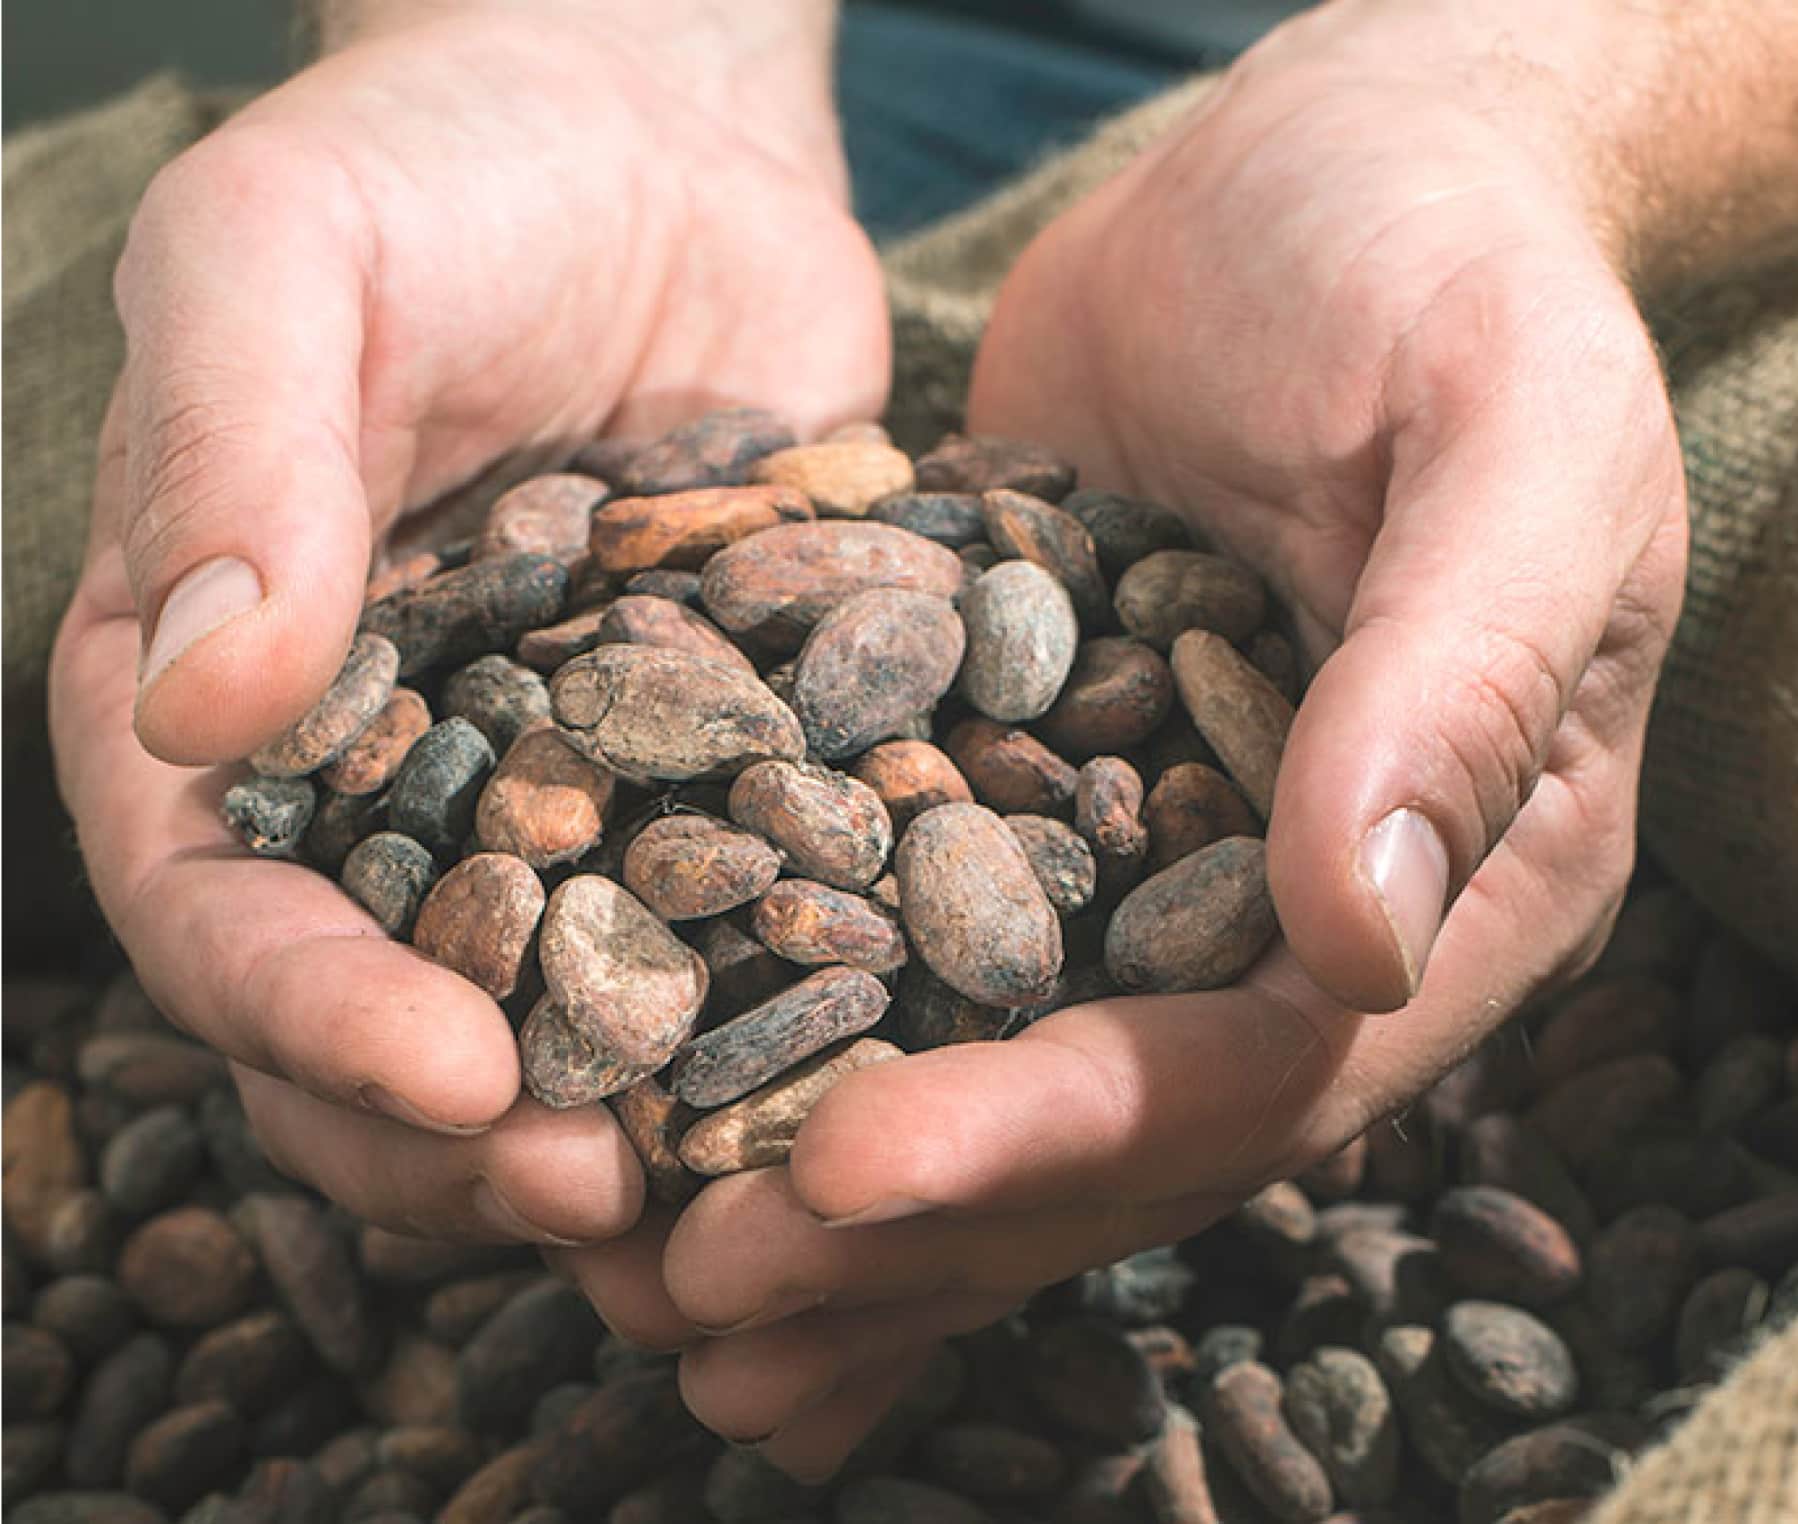 Cocoa beans in a person's hands